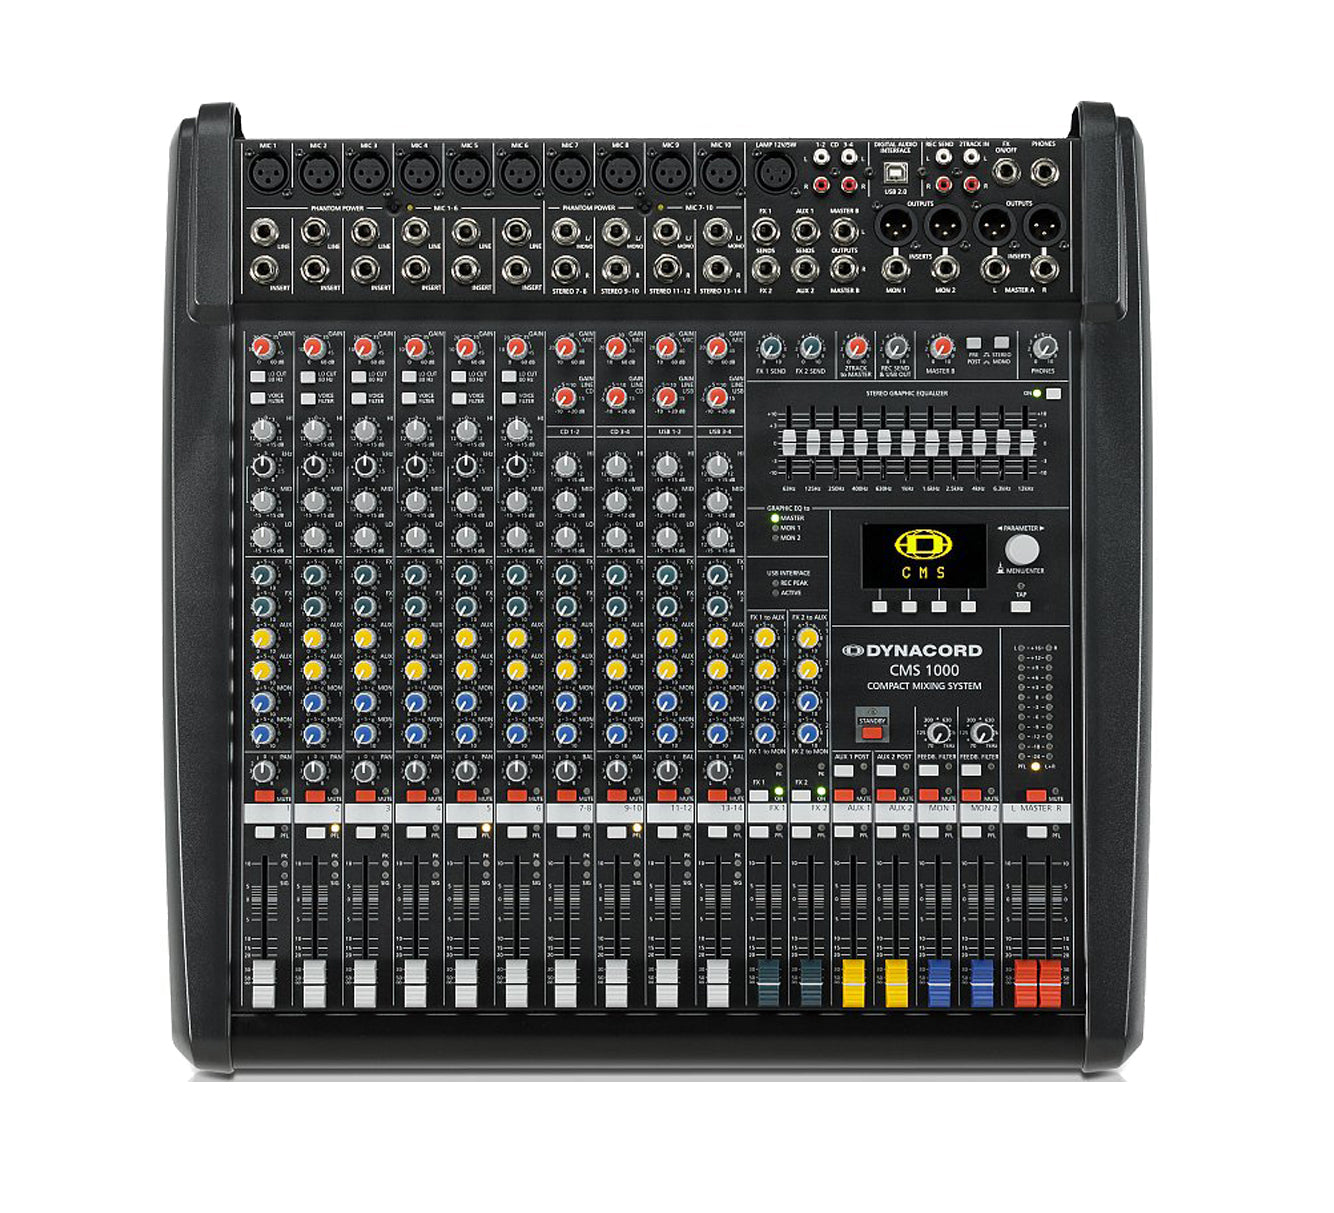 Dynacord CMS 1000-3 Mixer hire